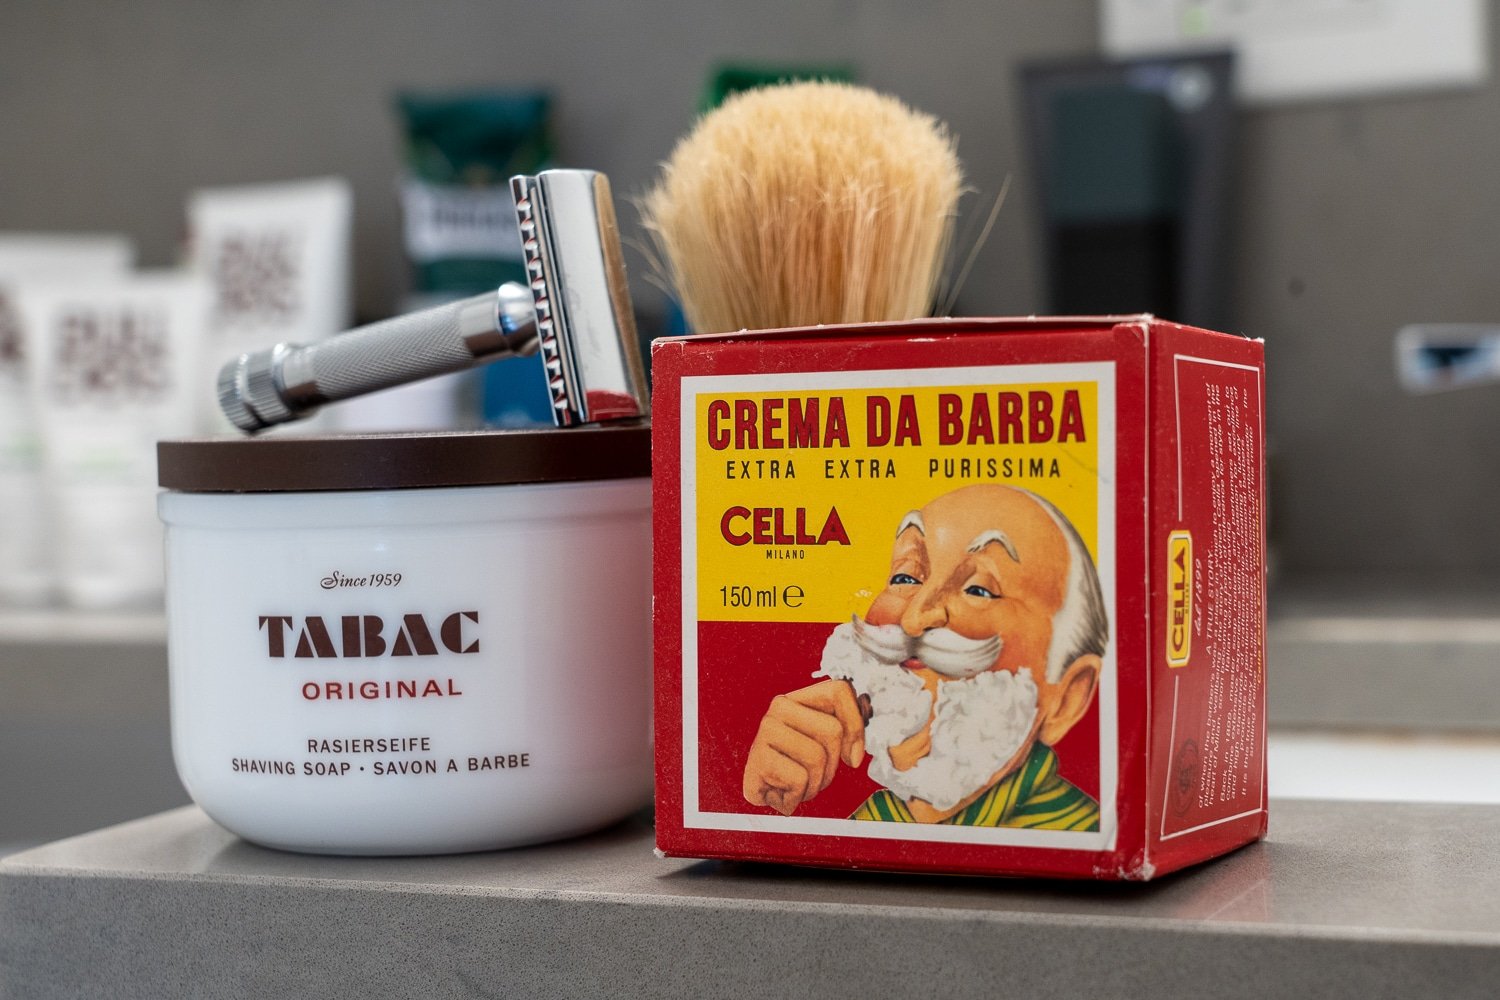 tabac and cella shaving soaps on a bathroom countertop